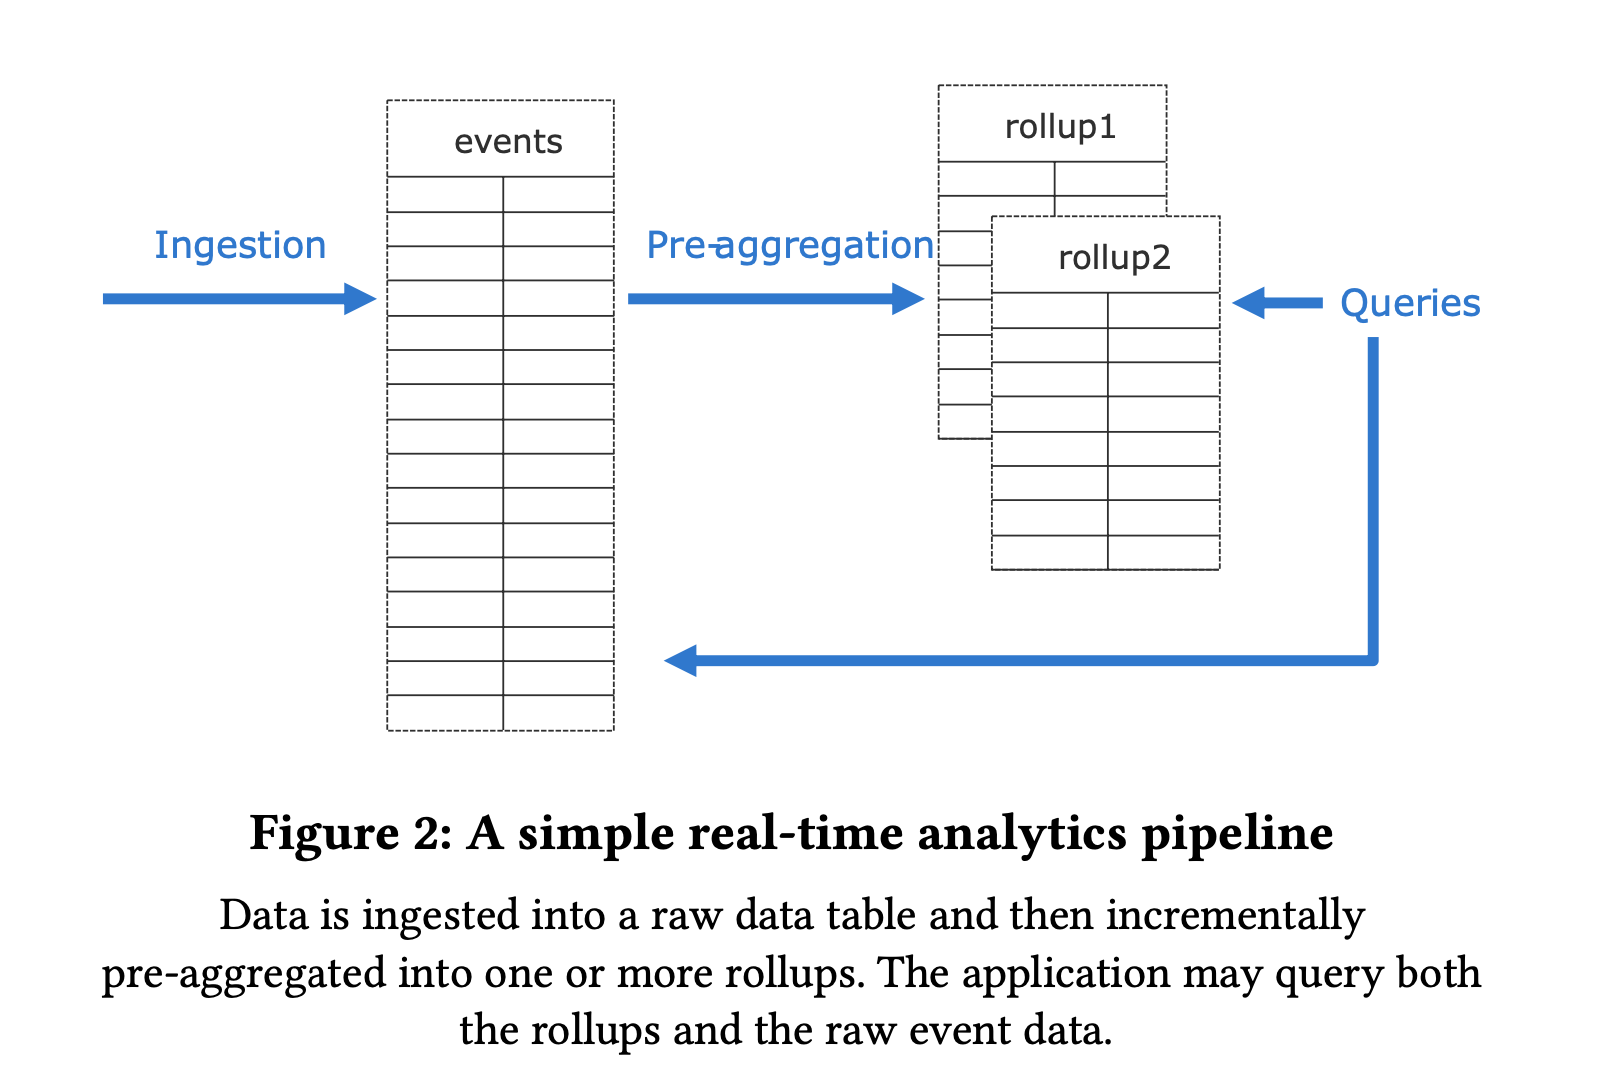 A simple real-time analytics pipeline